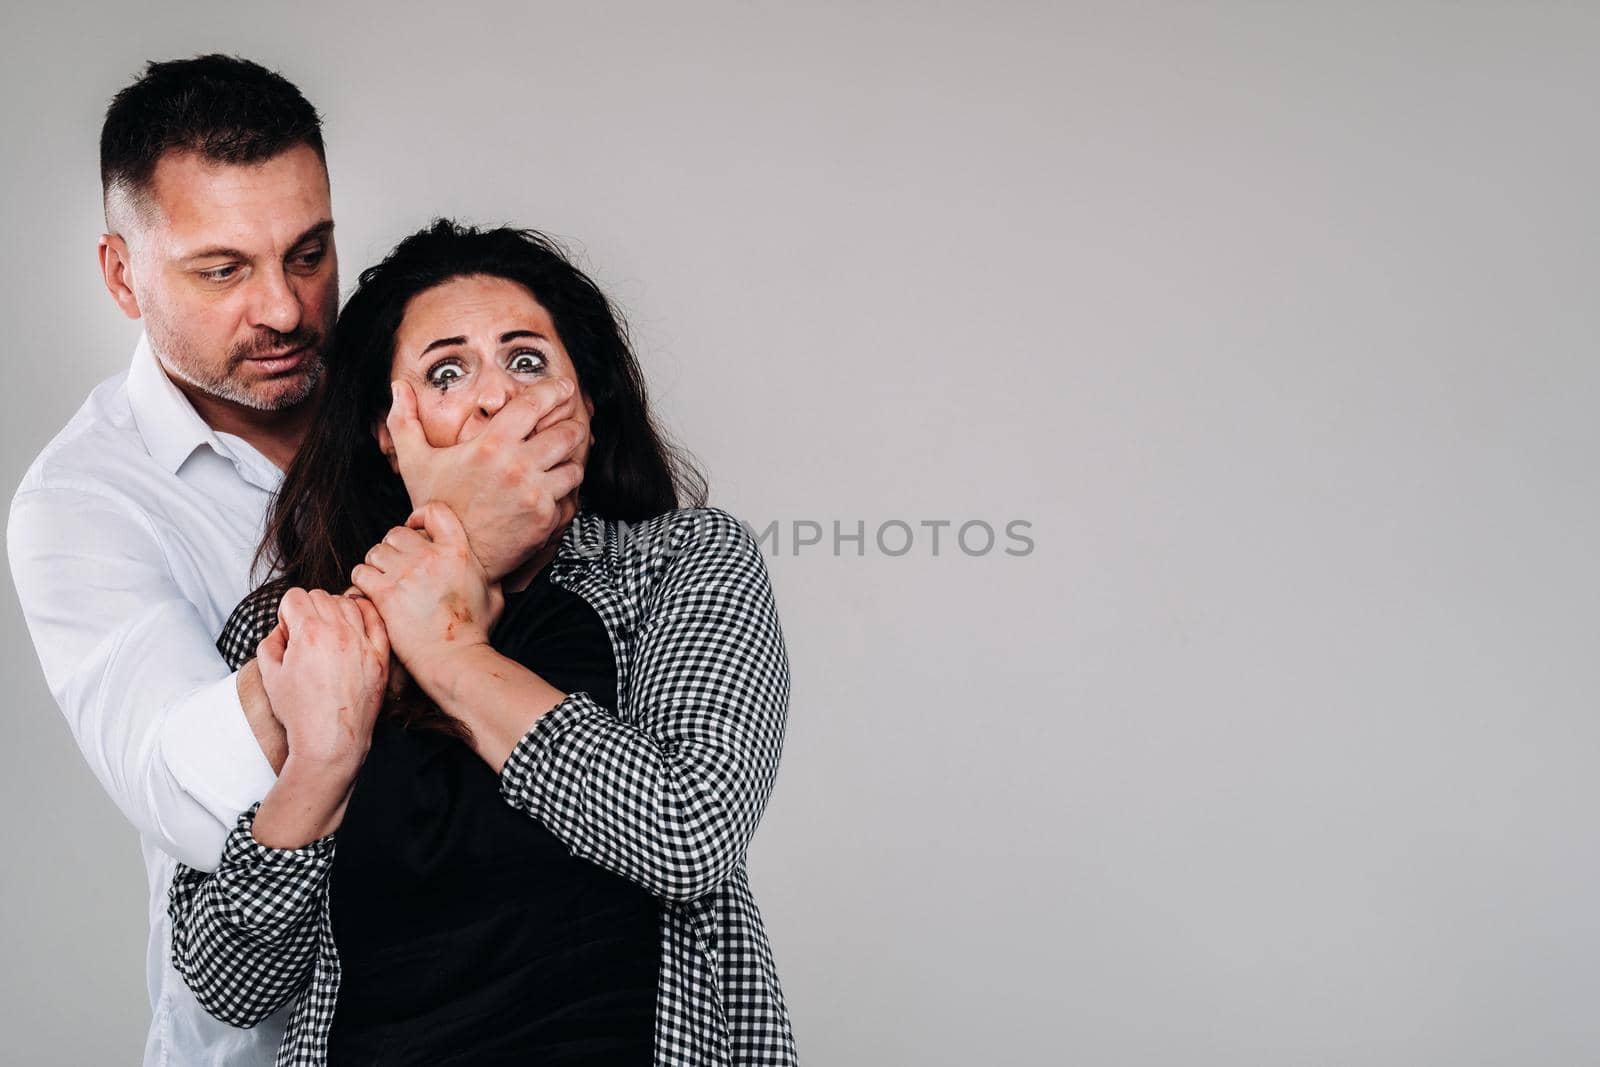 An aggressive man covers the mouth of a beaten woman so that she cannot scream. Domestic violence.